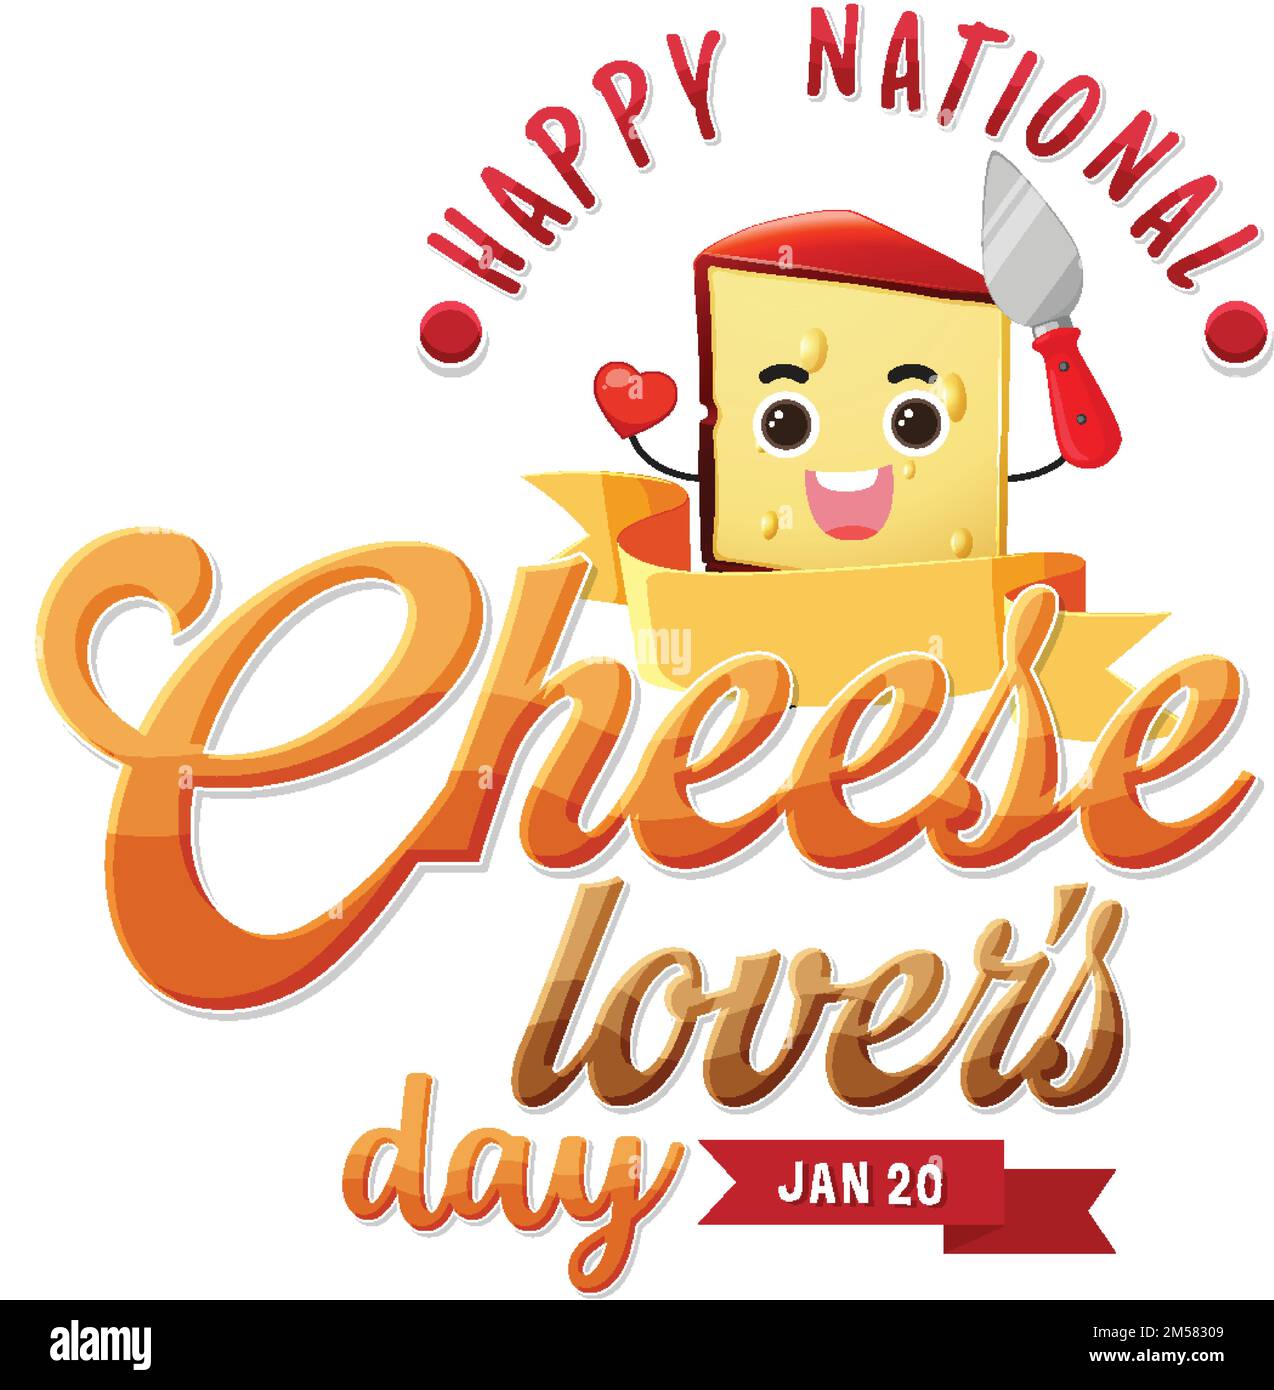 National Cheese Lovers Day Banner Design illustration Stock Vector